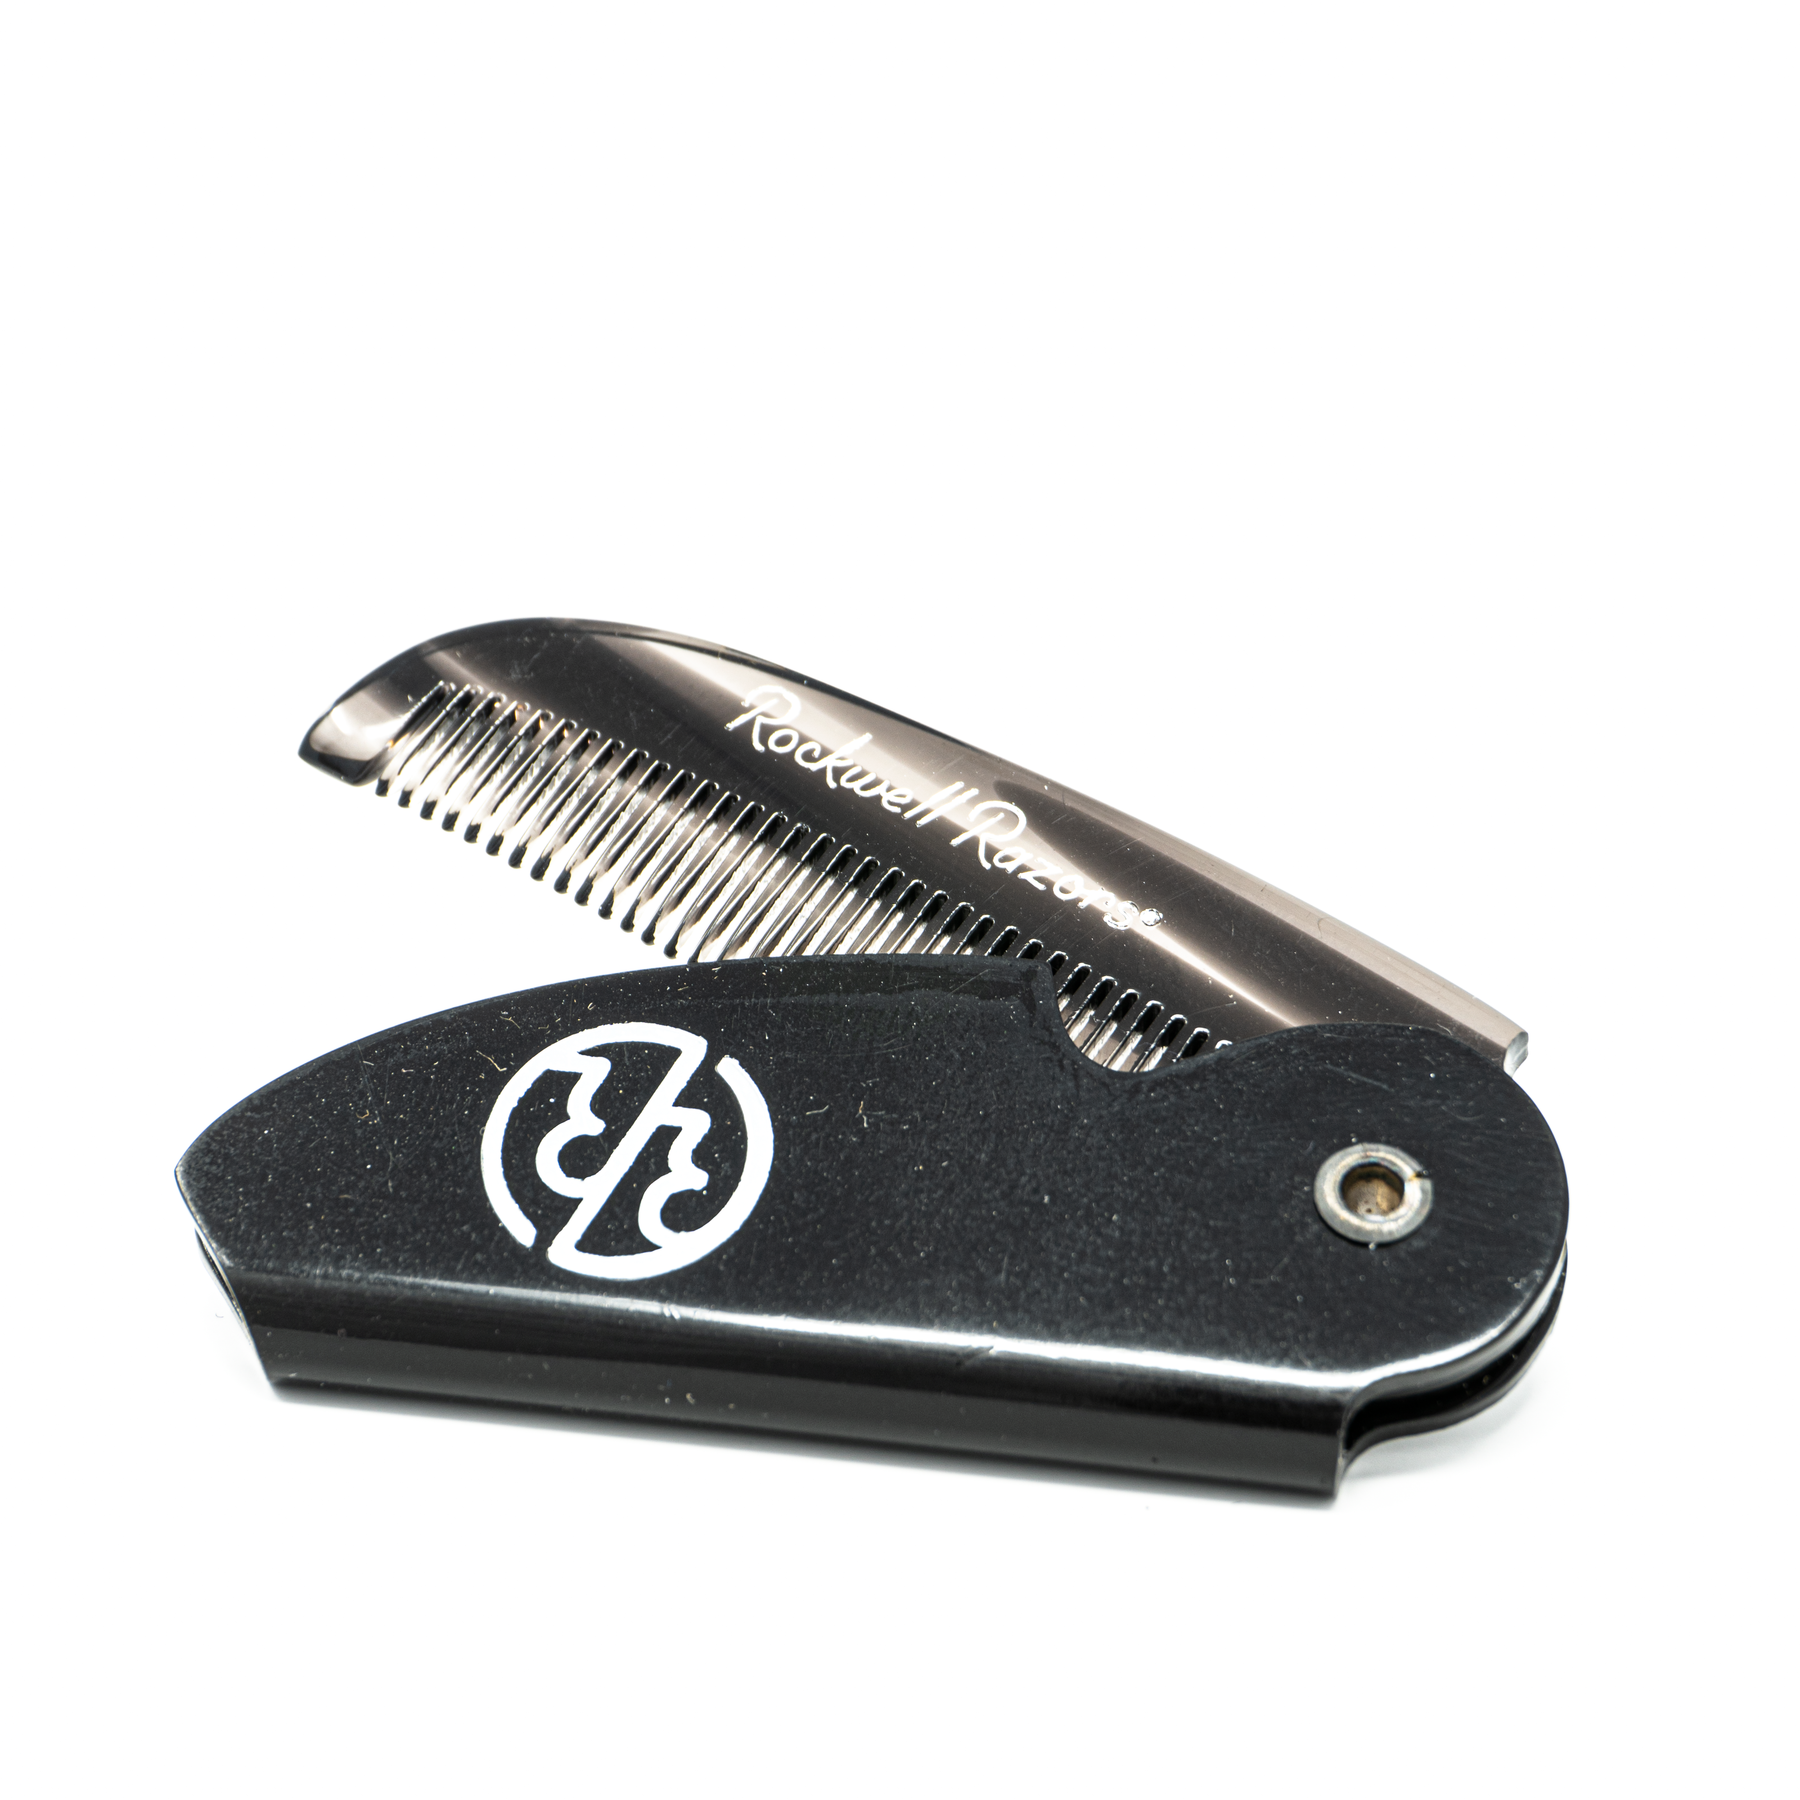 Rockwell foldable comb for mustache and beard